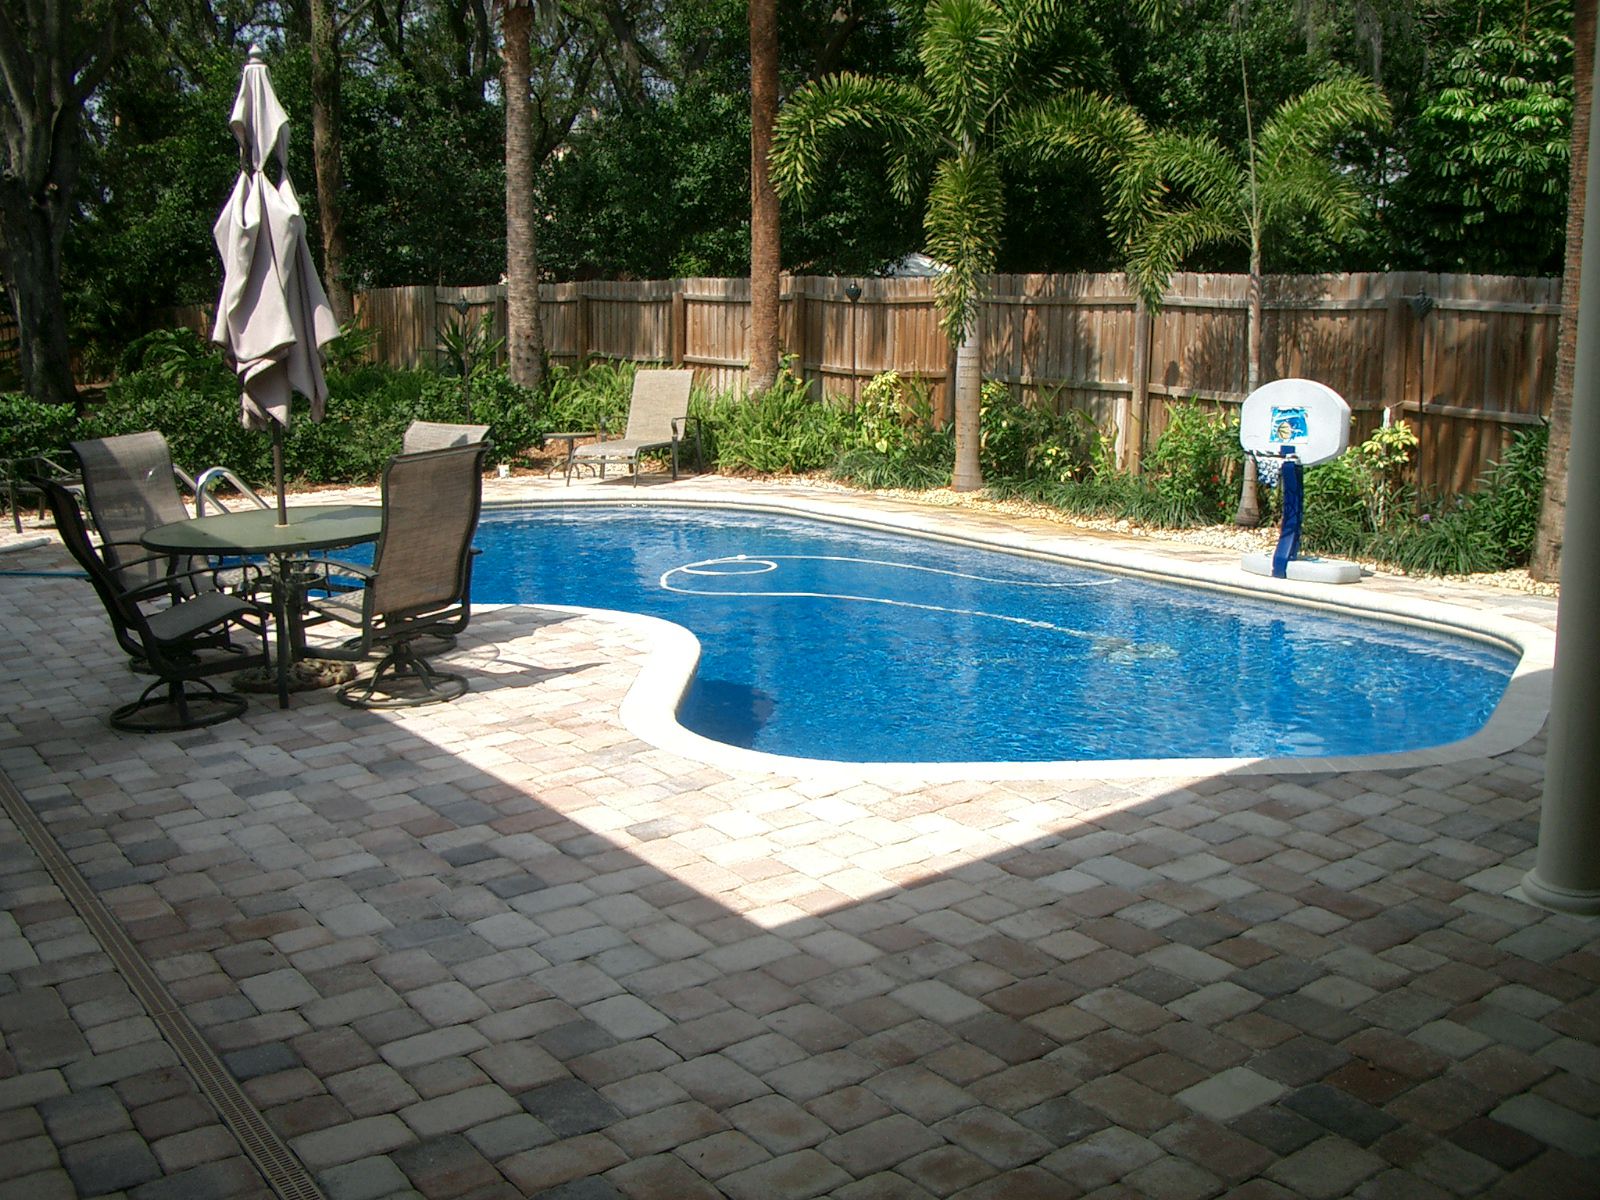 Pool Design Floor Backyard Pool Design With Paved Floor Round Table With Chairs Pool Side Chairs And Kiddies Basketball Ring Backyard Appealing Backyard Pool Designs For Contemporary Residences